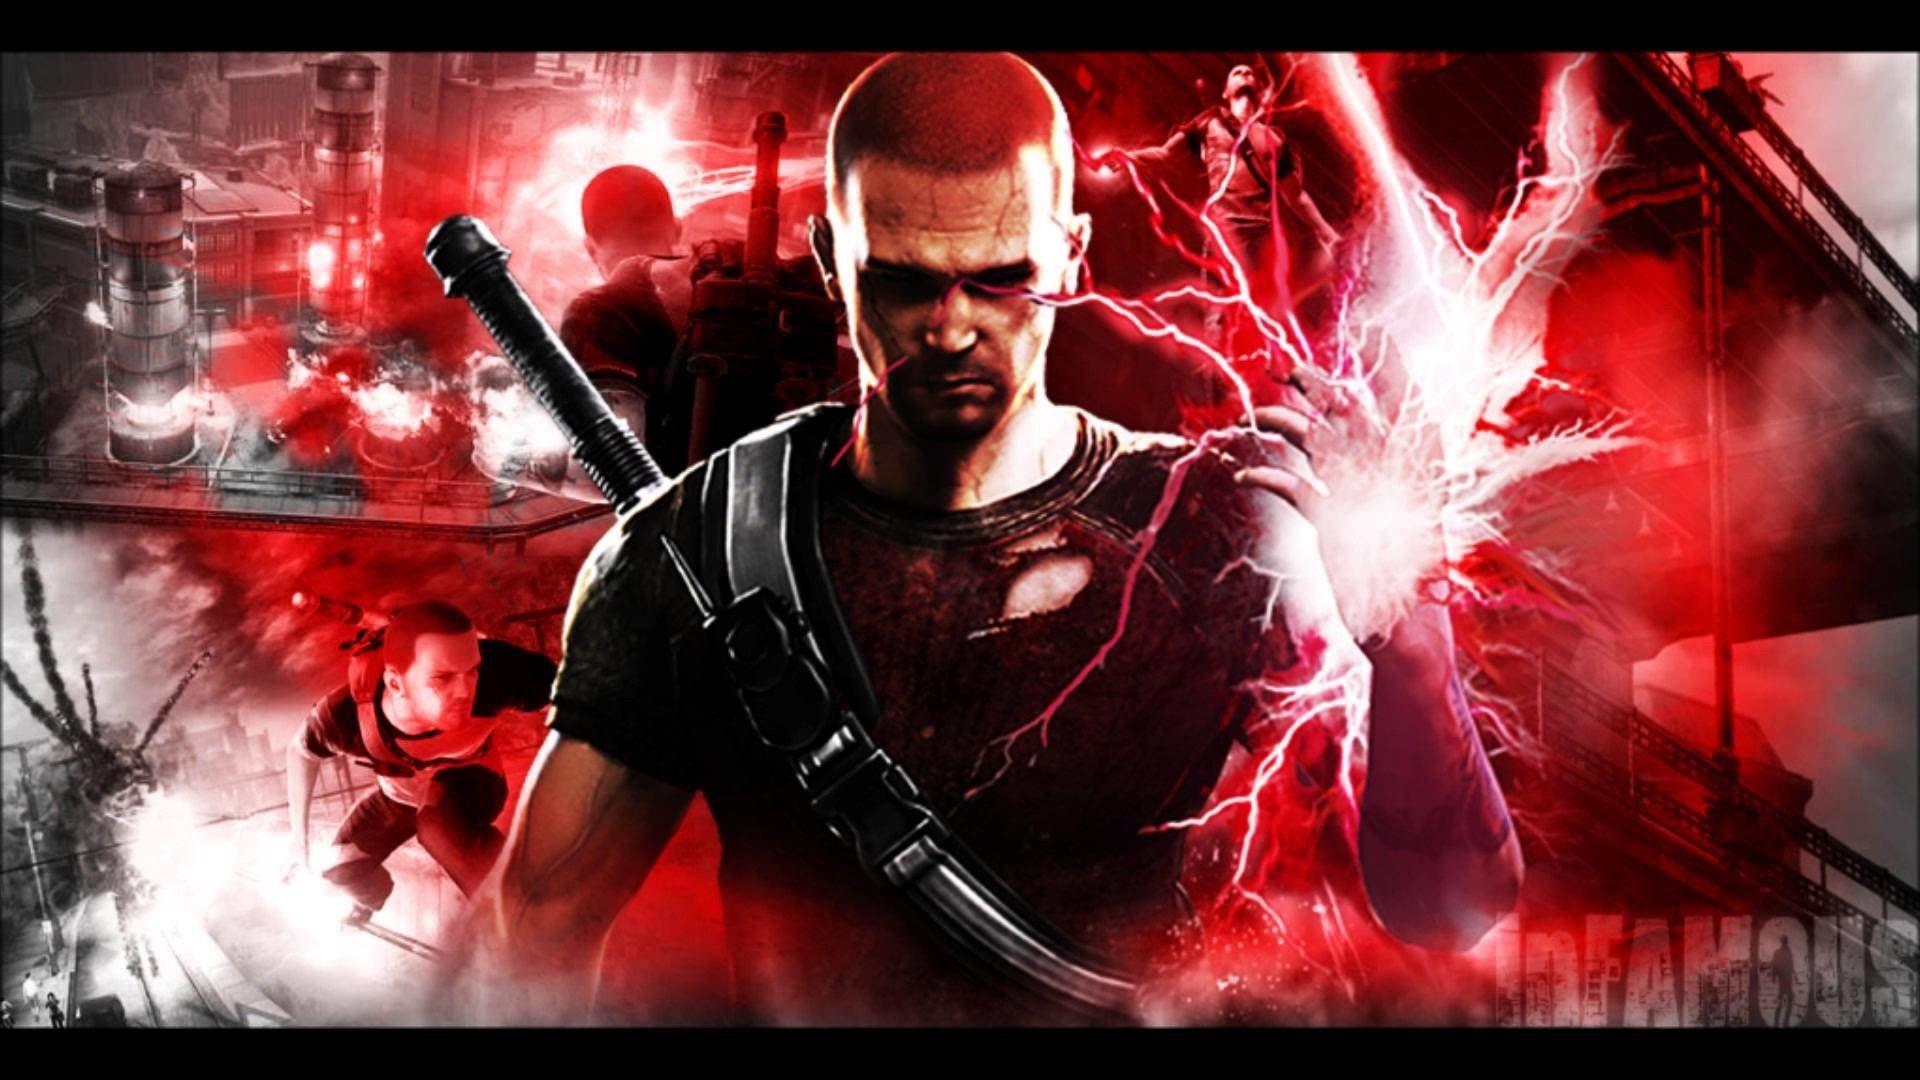 Infamous Backgrounds